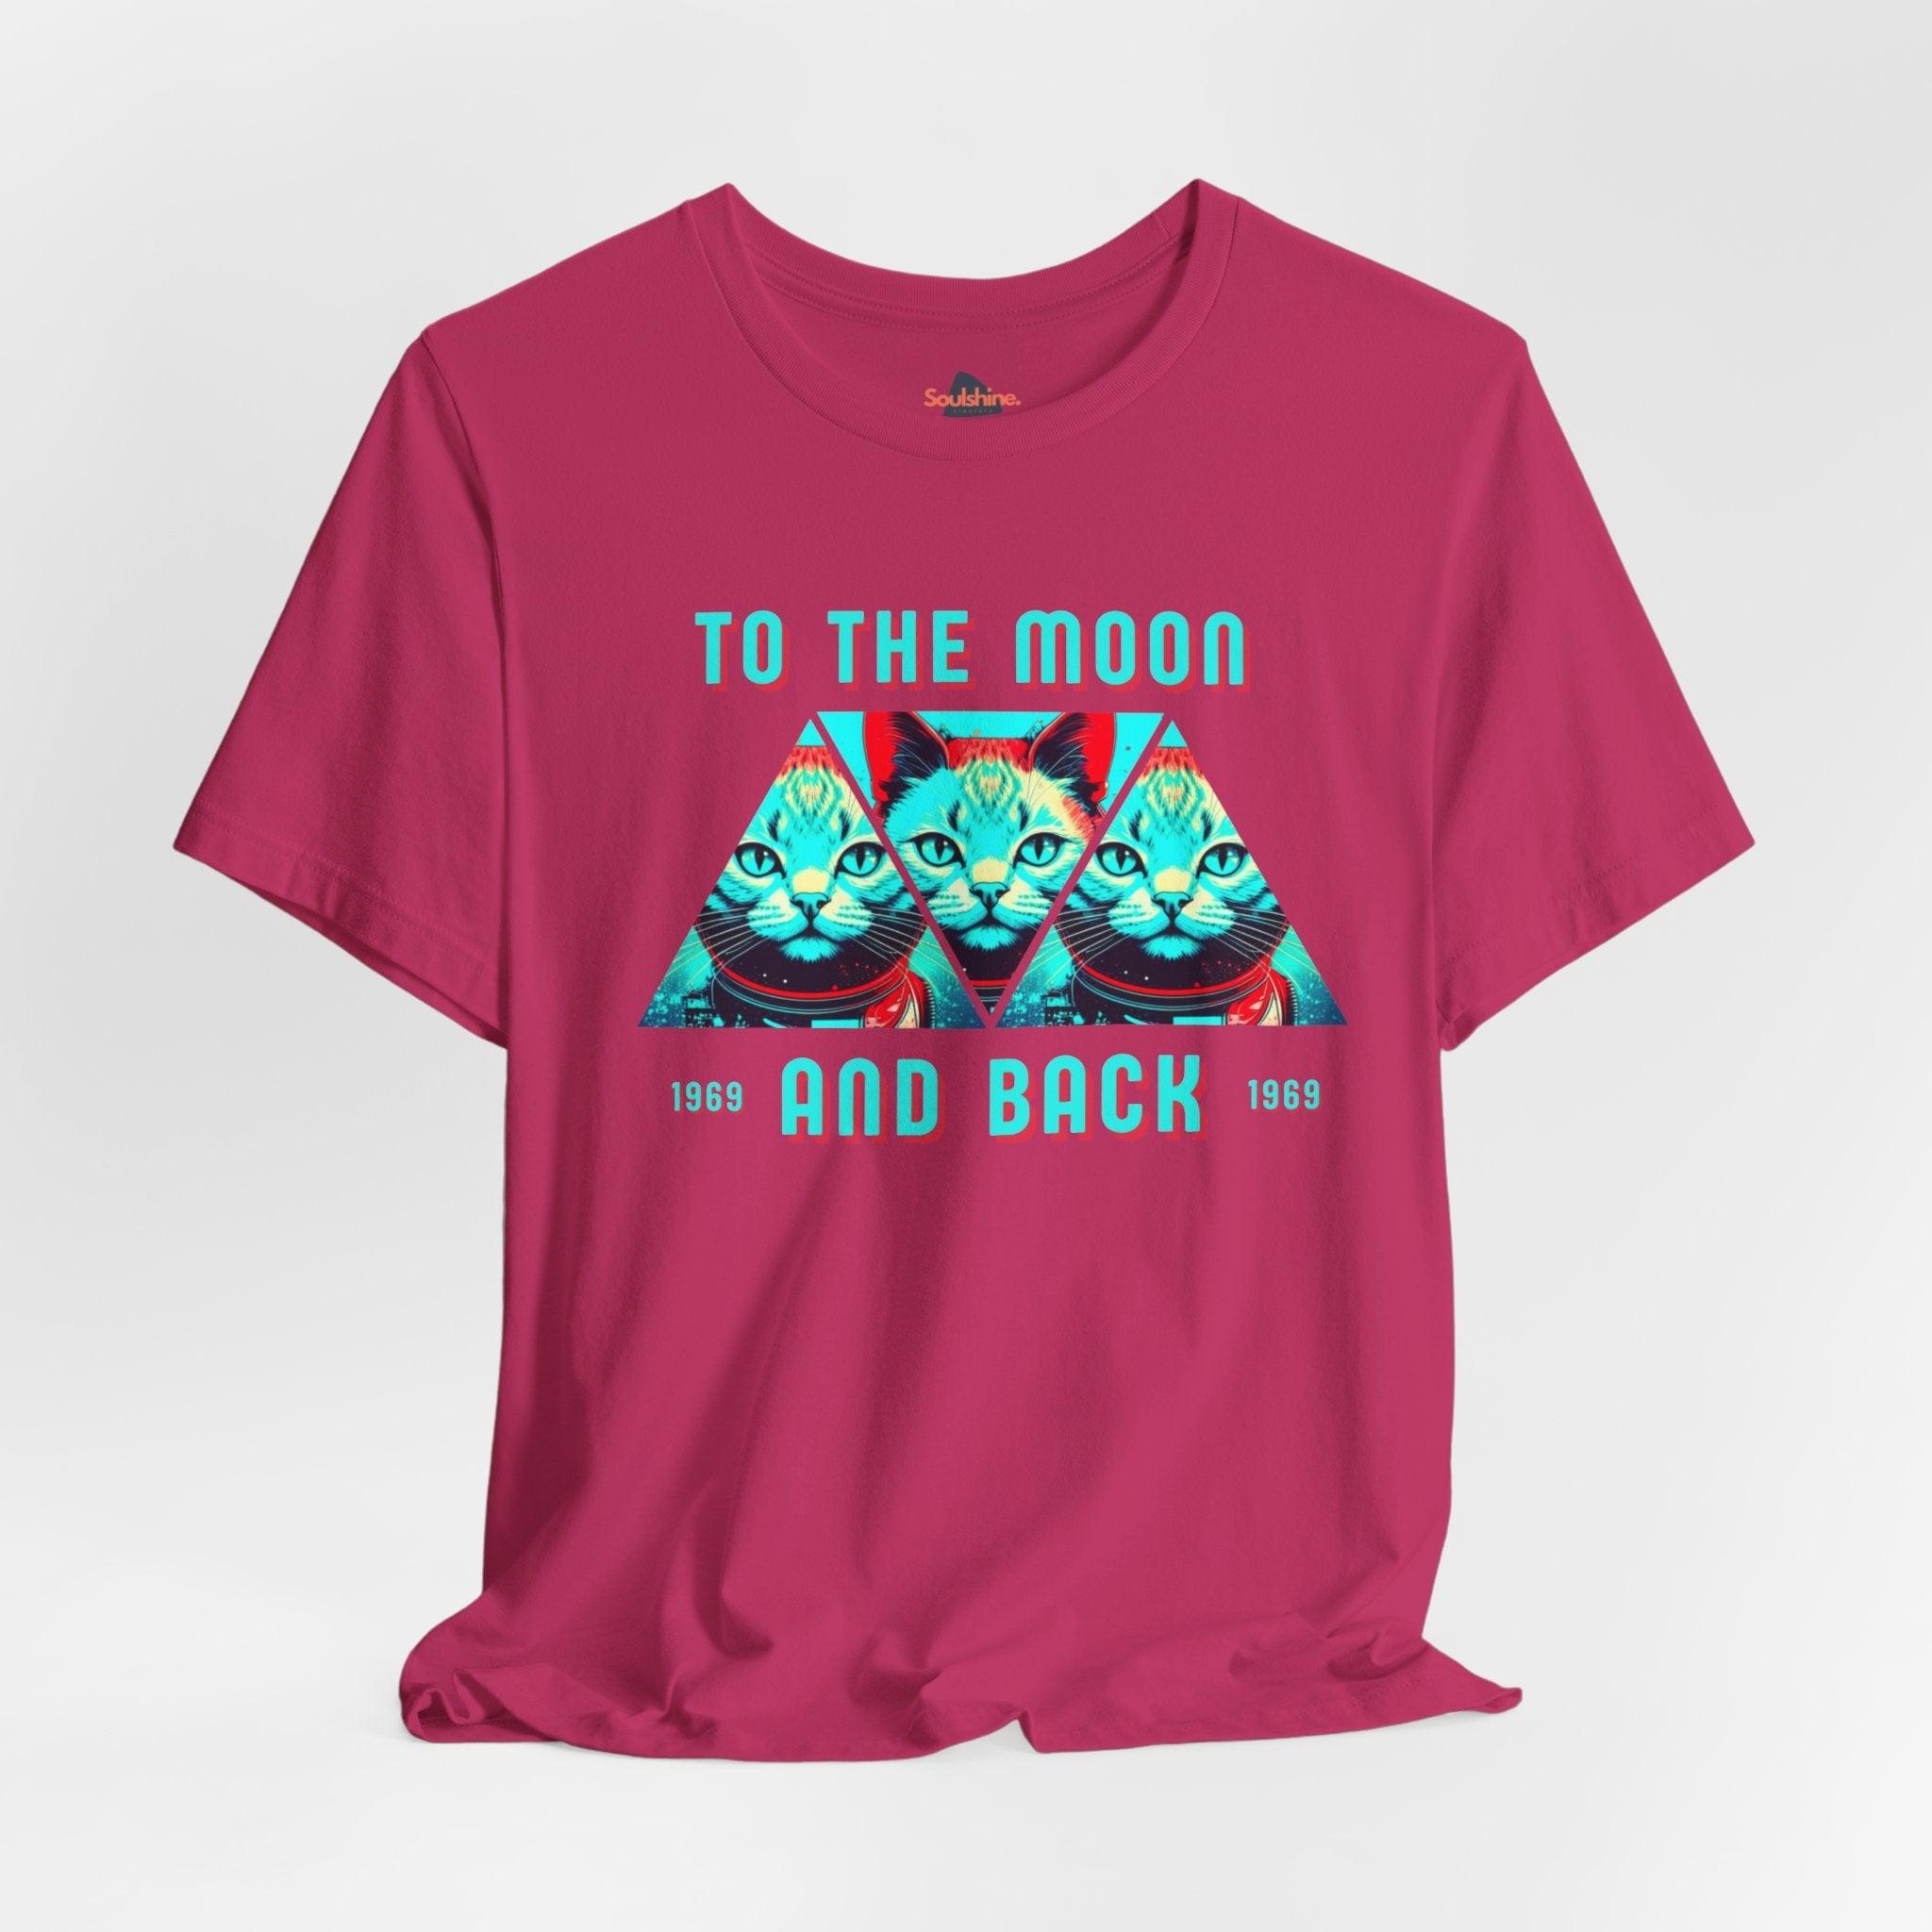 To the moon and back - Soulshinecreators - Unisex Jersey Short Sleeve Tee - US Berry S T-Shirt by Soulshinecreators | Soulshinecreators